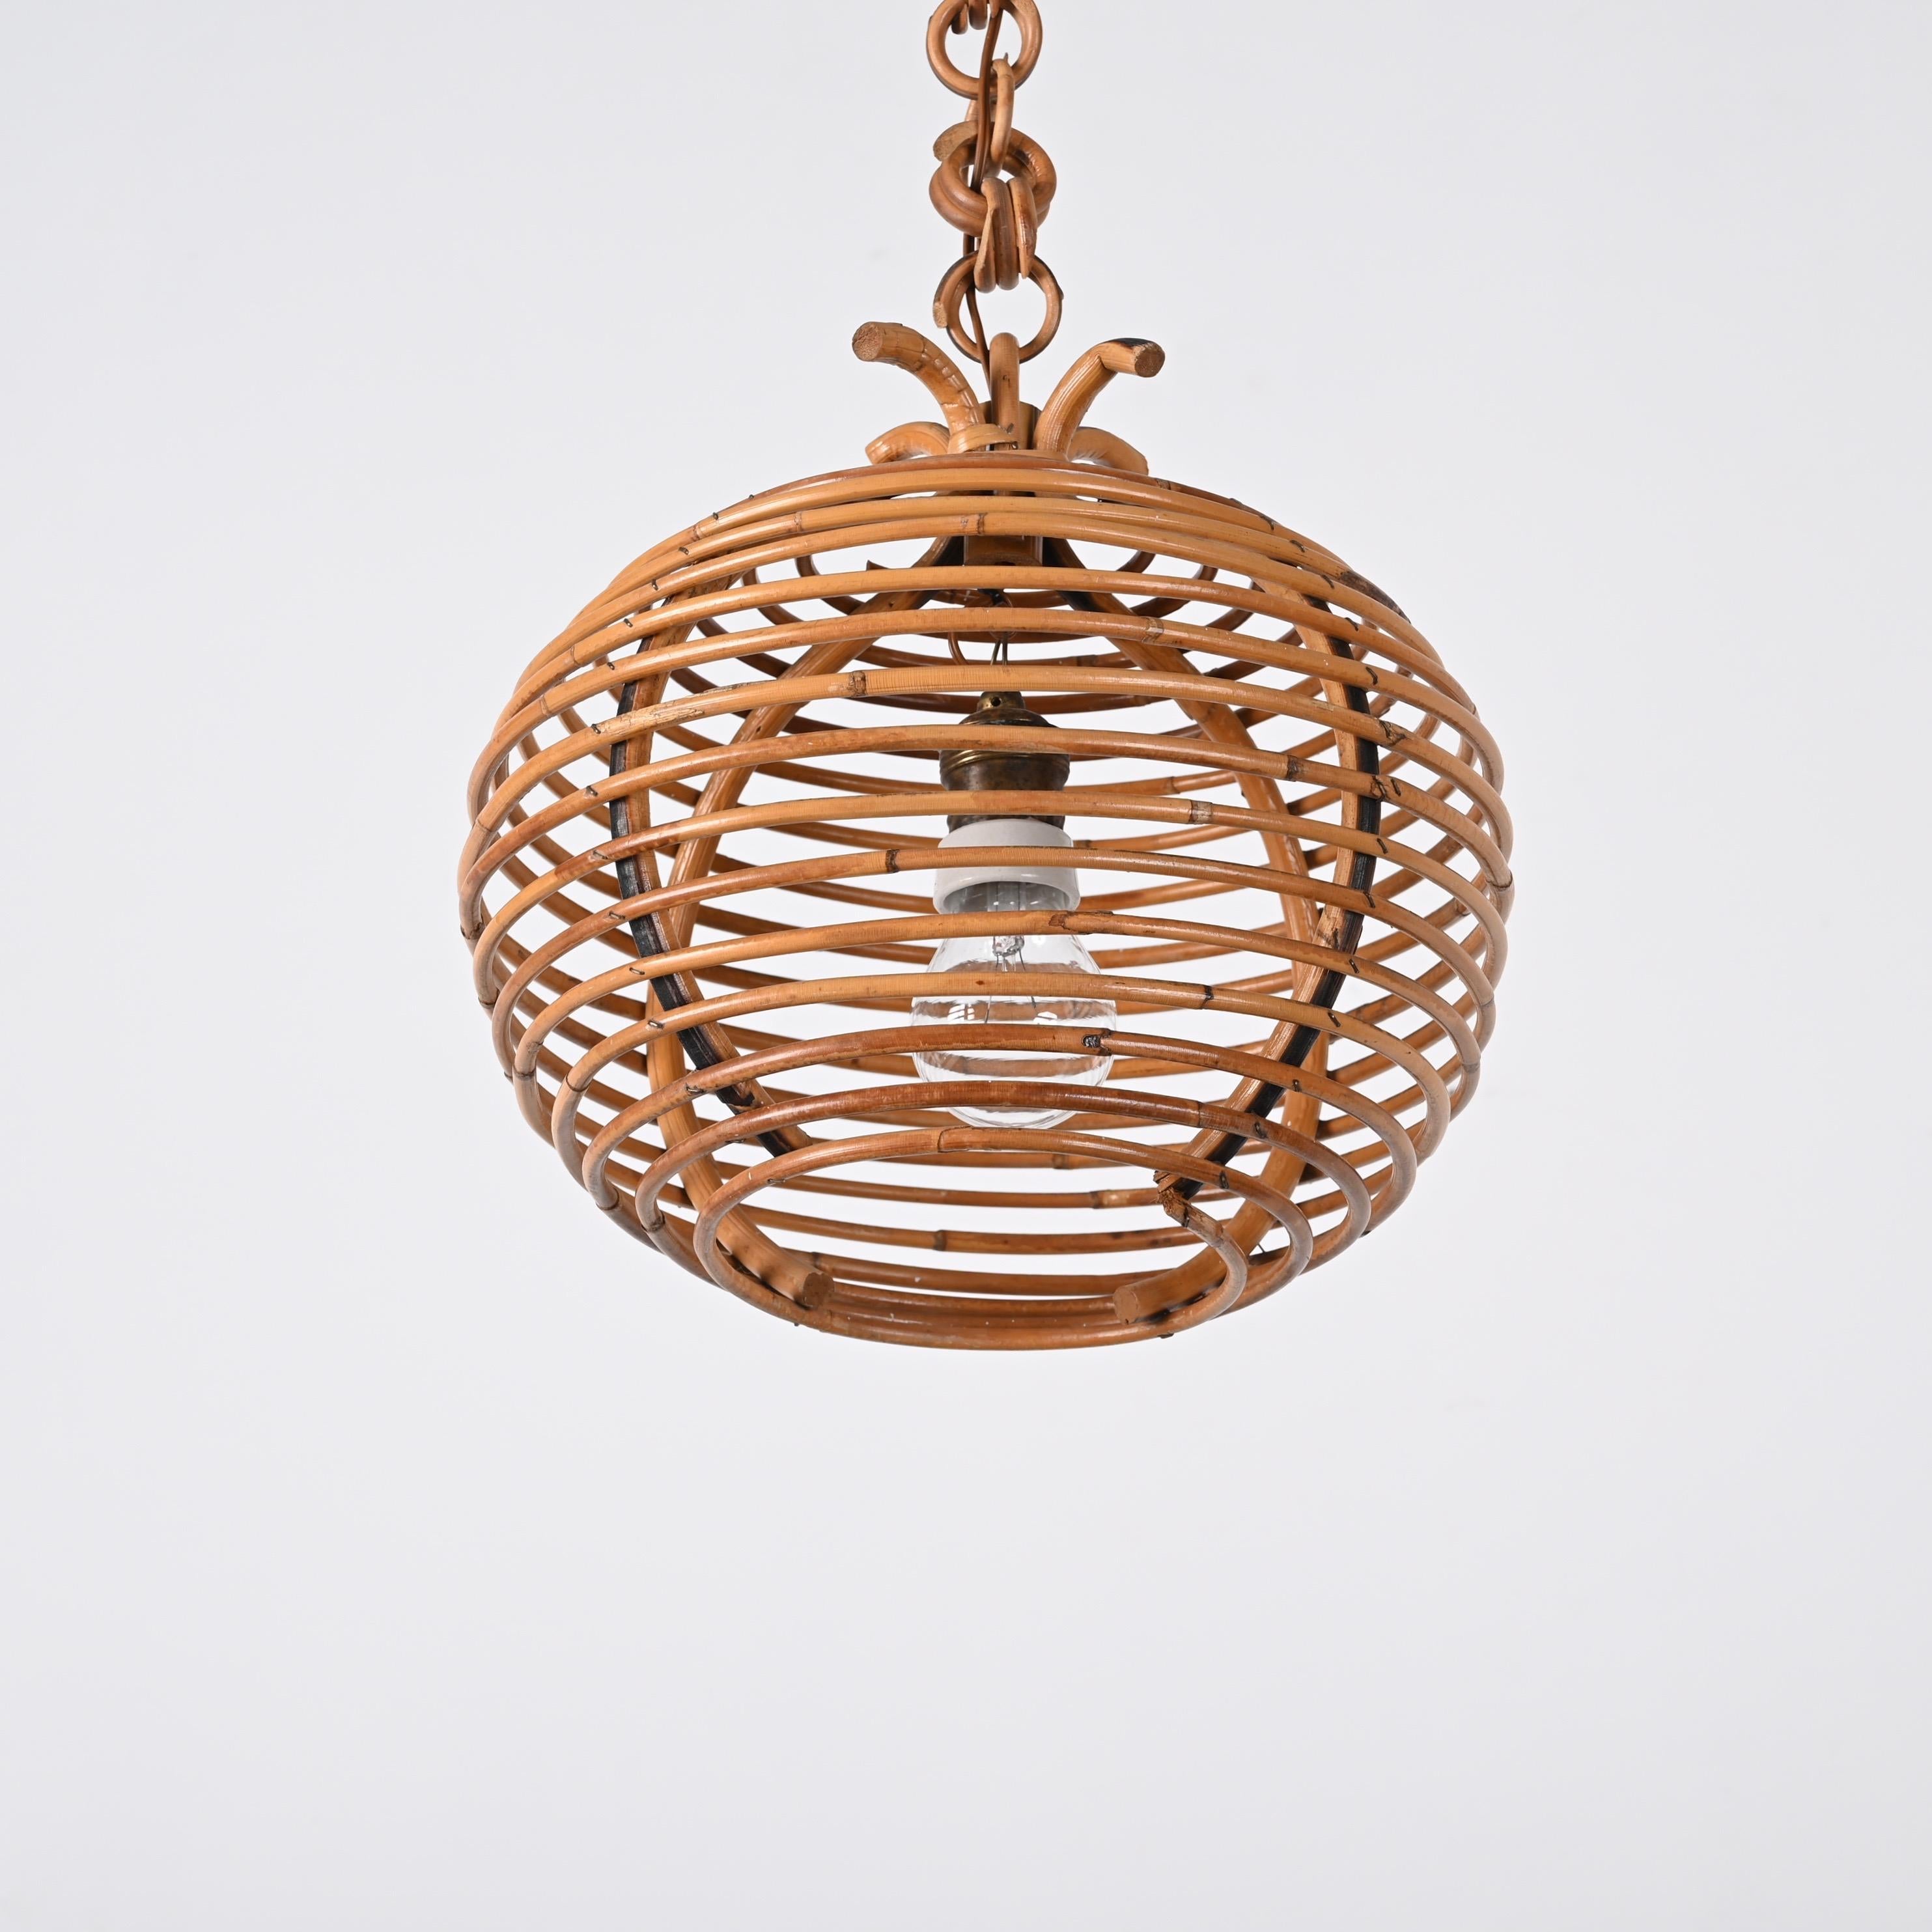 Stunning midcentury bamboo and rattan spherical chandelier in Cote d'Azur style. This wonderful item was produced in Italy during the 1960s.

This gorgeous pendant features a spherical shape made by a spiral of curved rattan and an elegant rattan